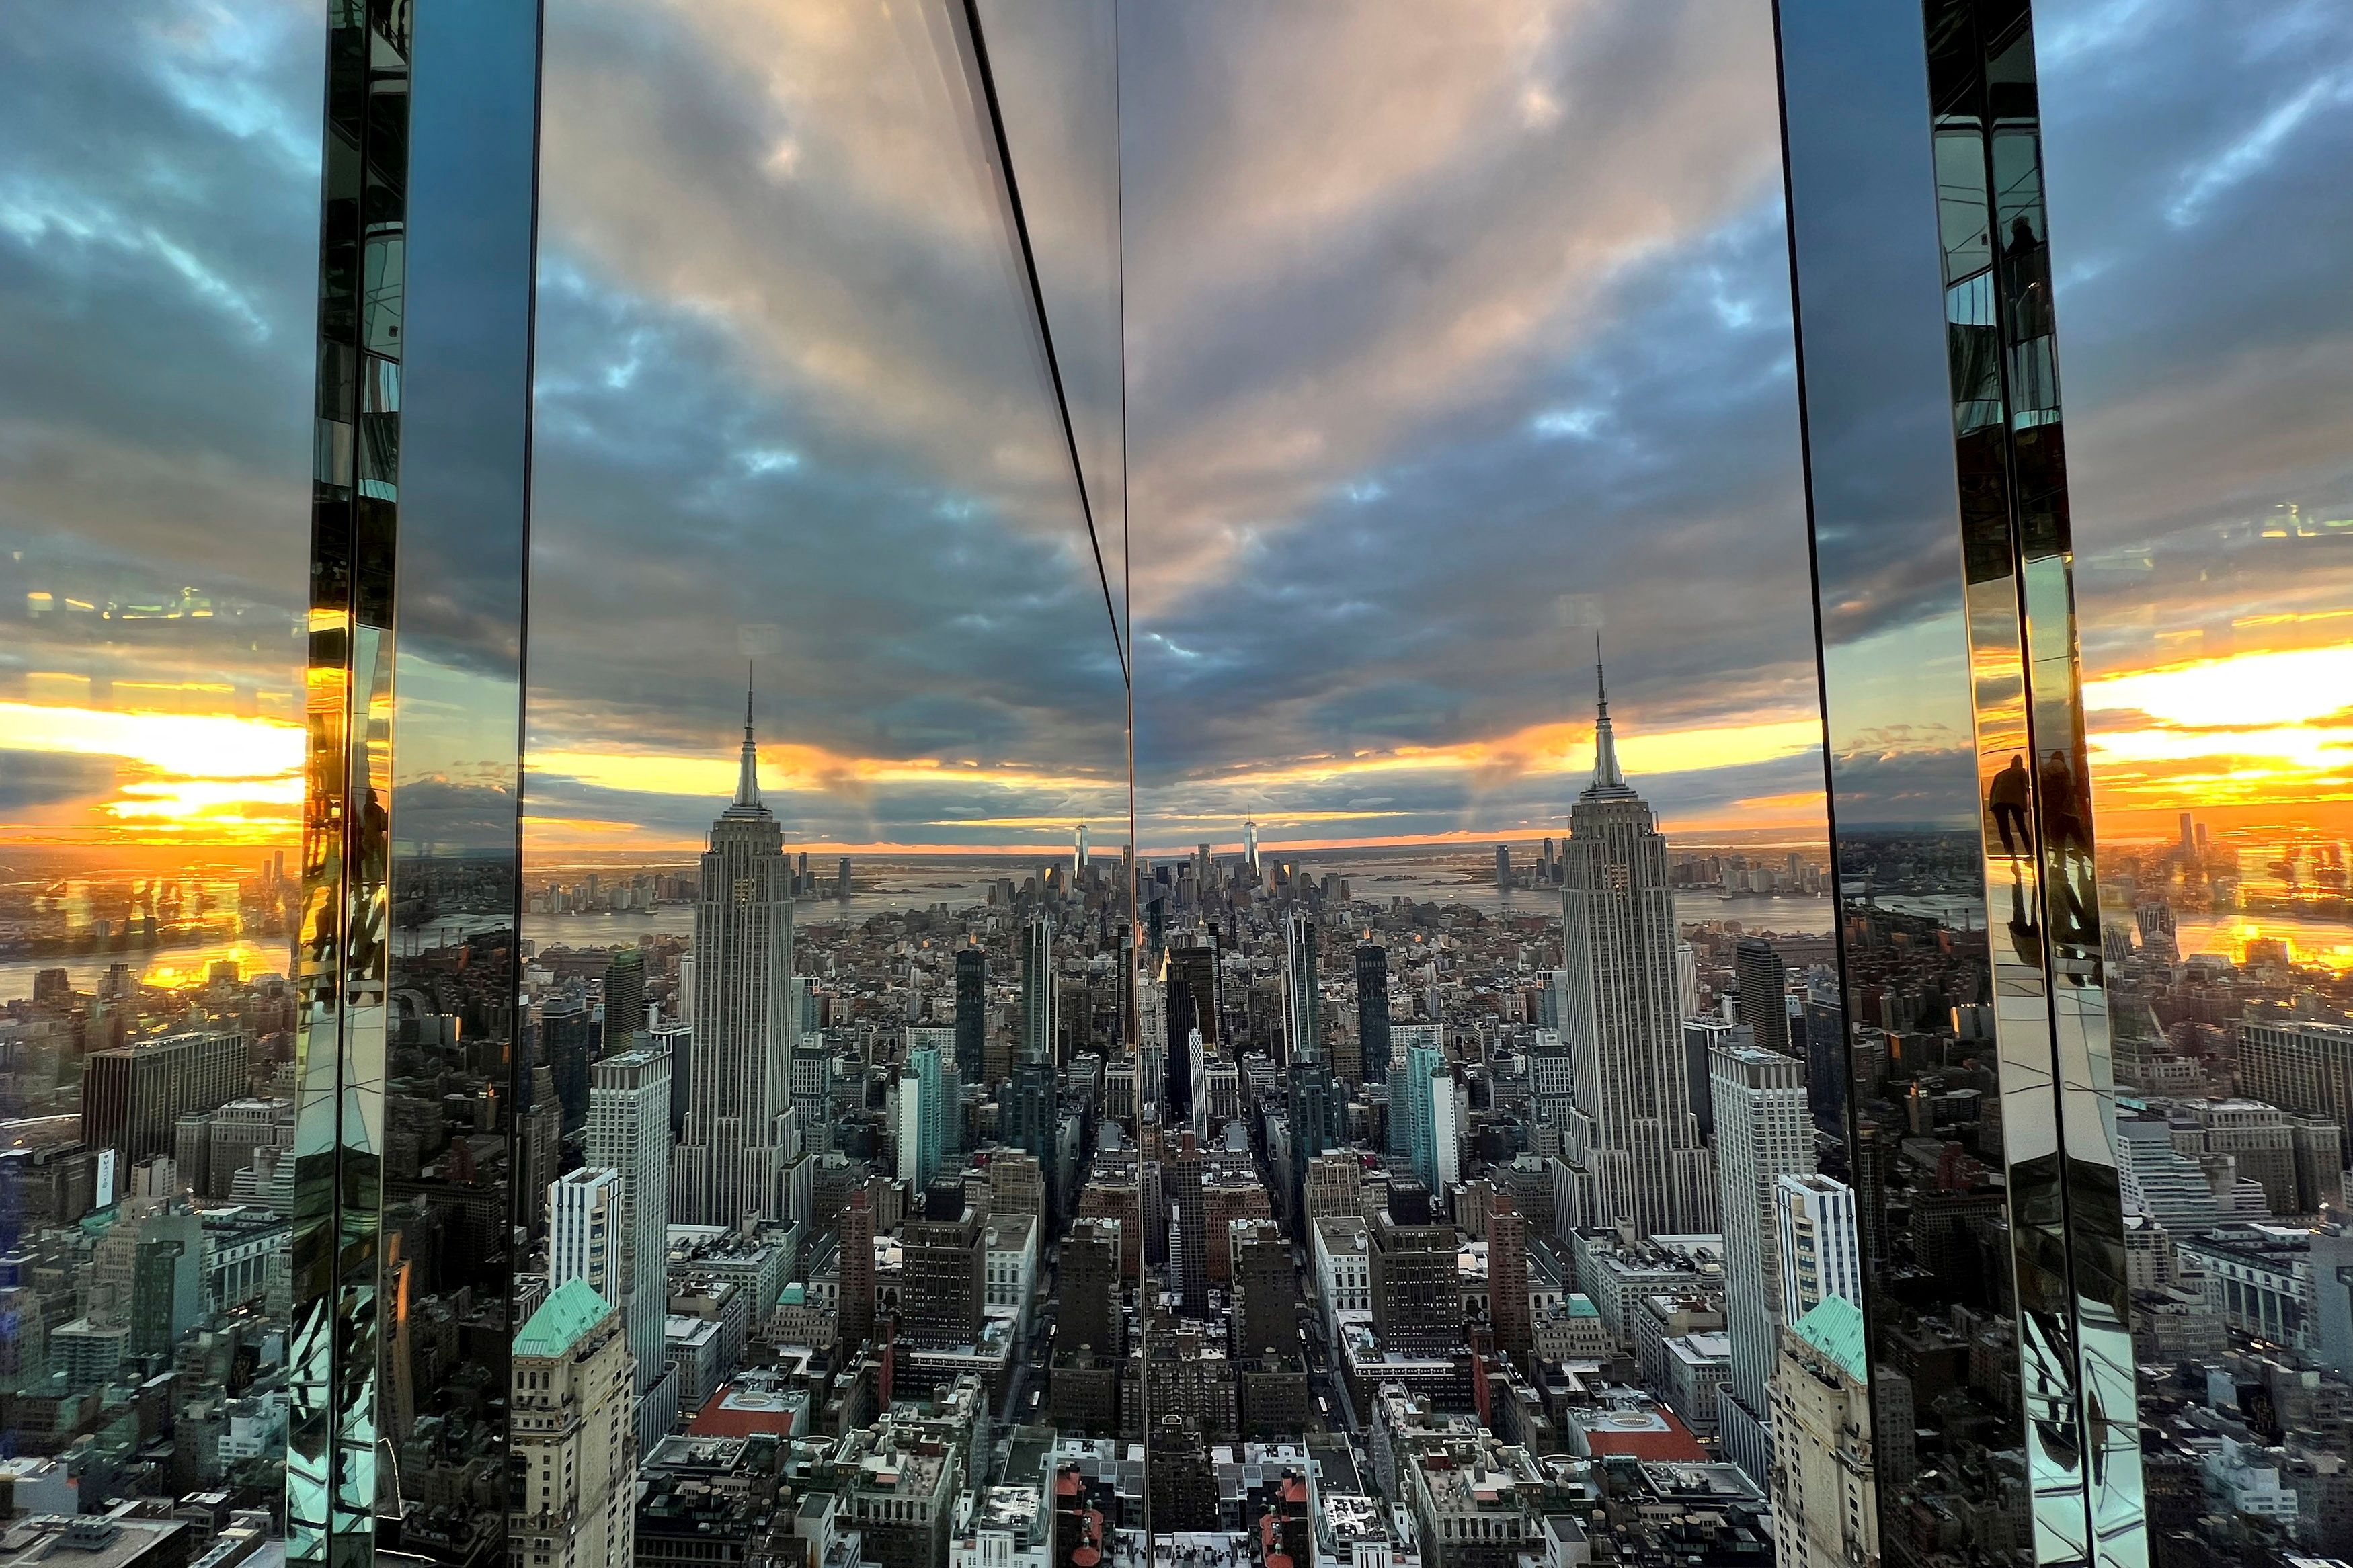 The Empire State Building and New York’s skyline are seen from the SUMMIT One Vanderbilt observation deck in Midtown Manhattan, in New York City